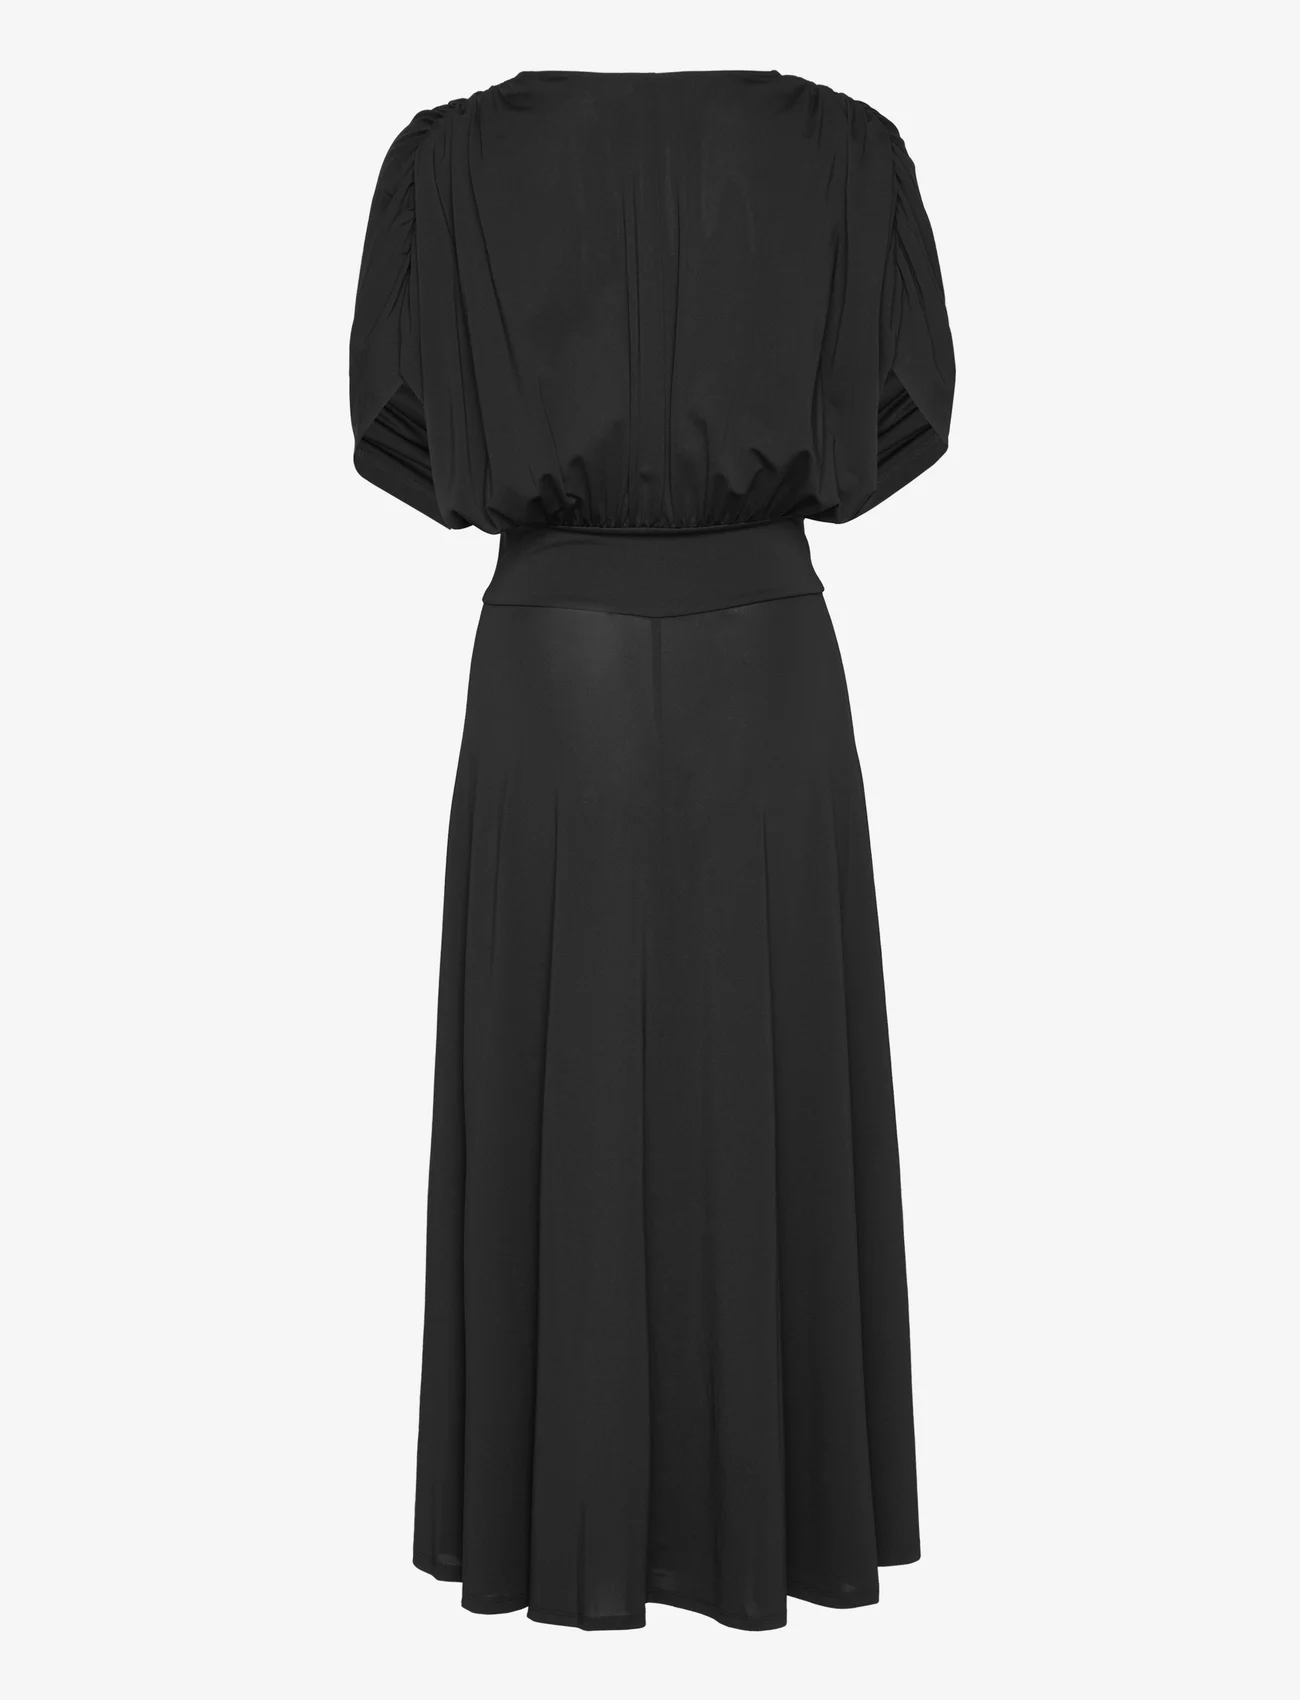 Marville Road - Carrie Jersey Dress - black - 1